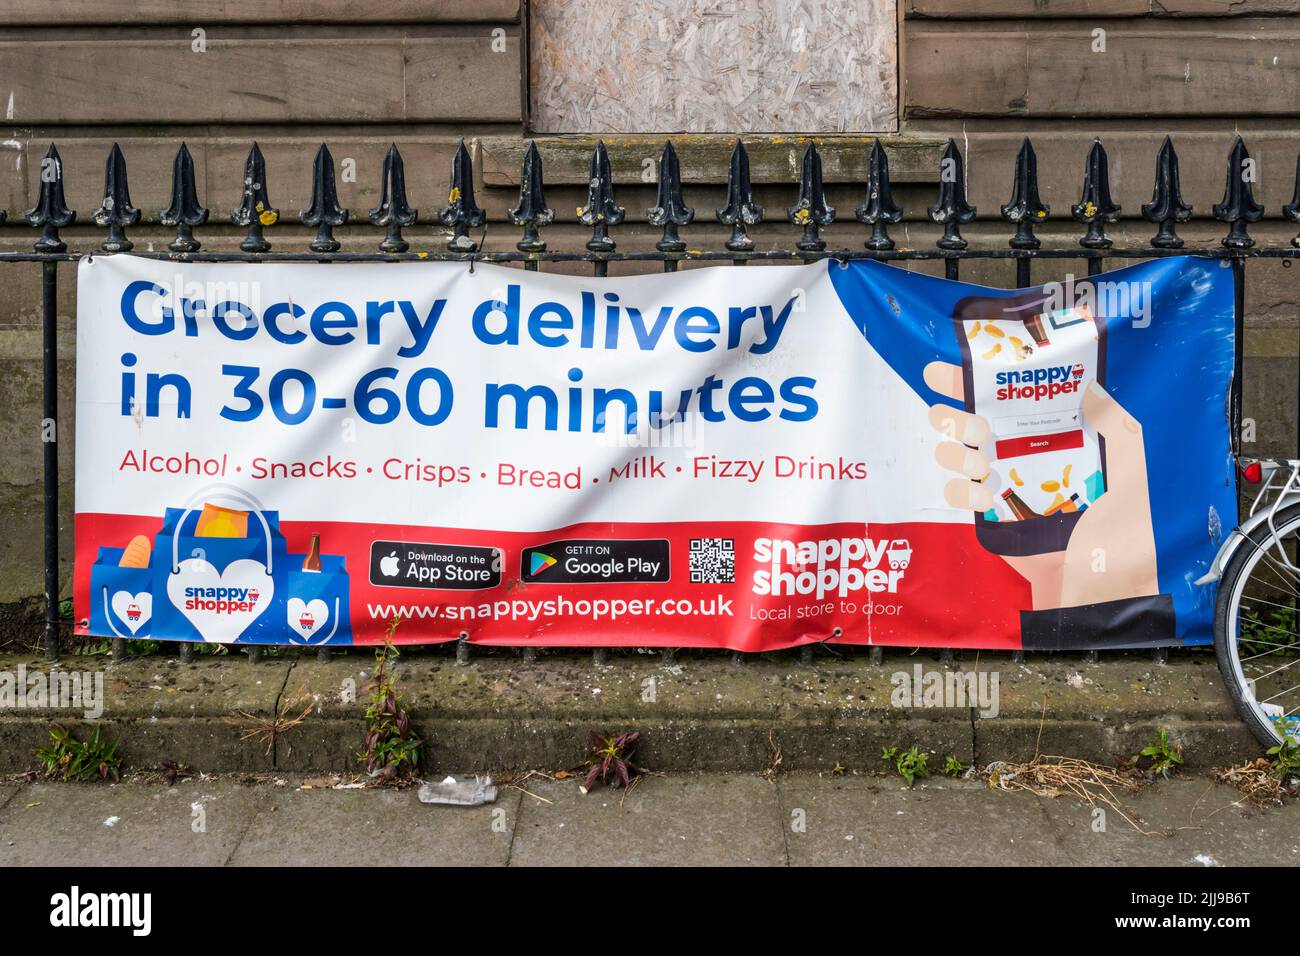 An advertisement for the Snappy Shopper grocery delivery app. Stock Photo